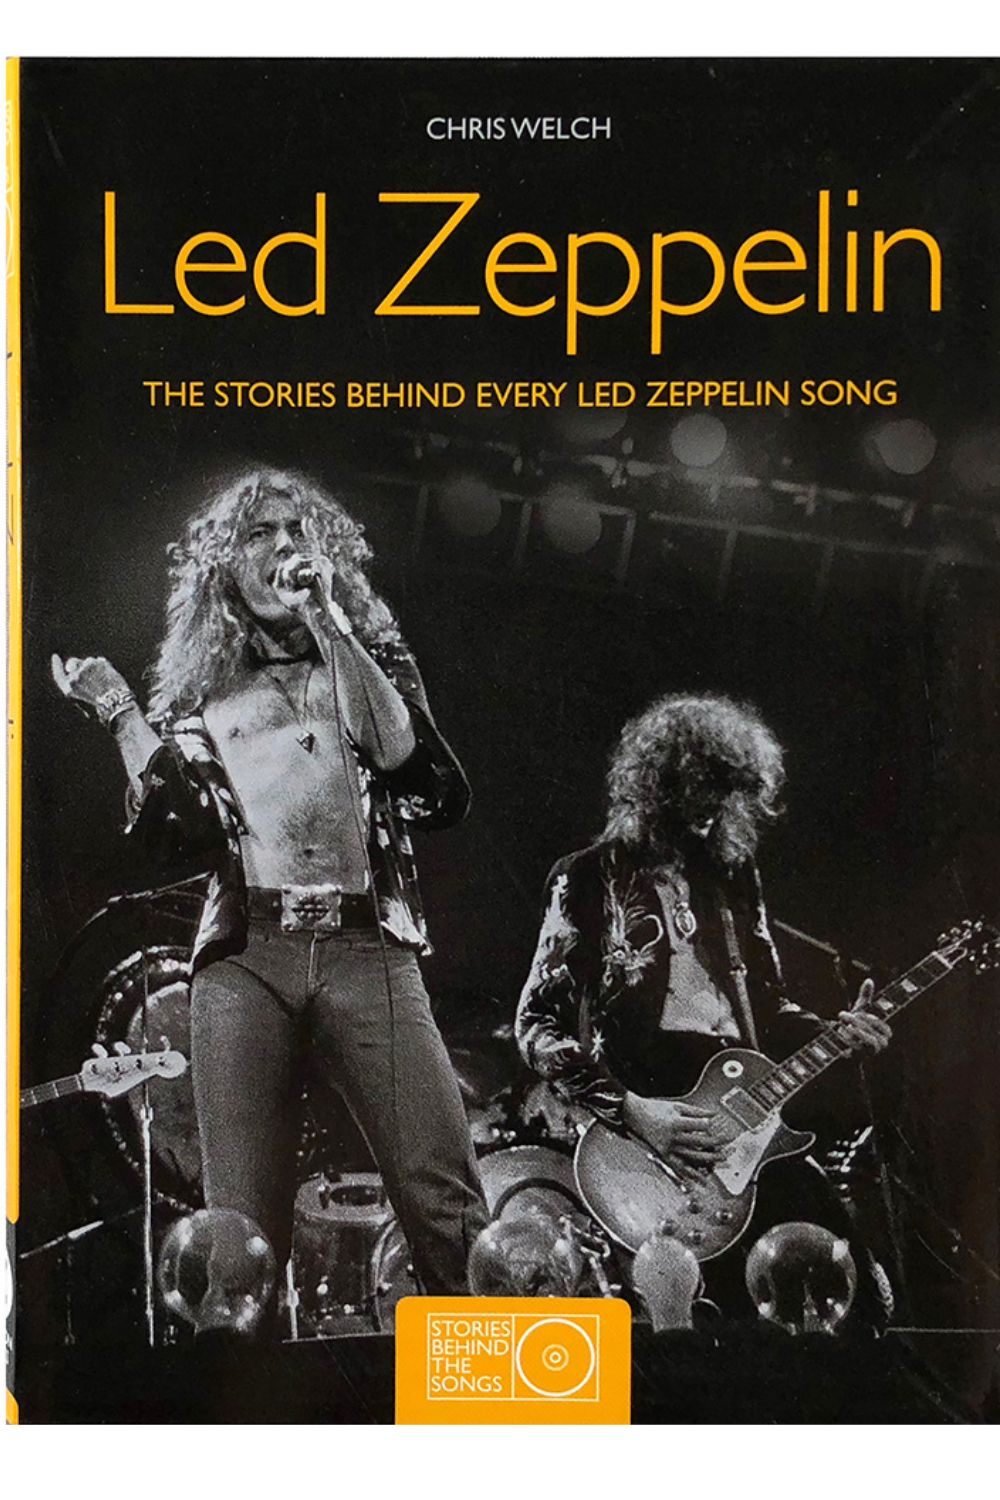 Led Zeppelin - The Stories Behind